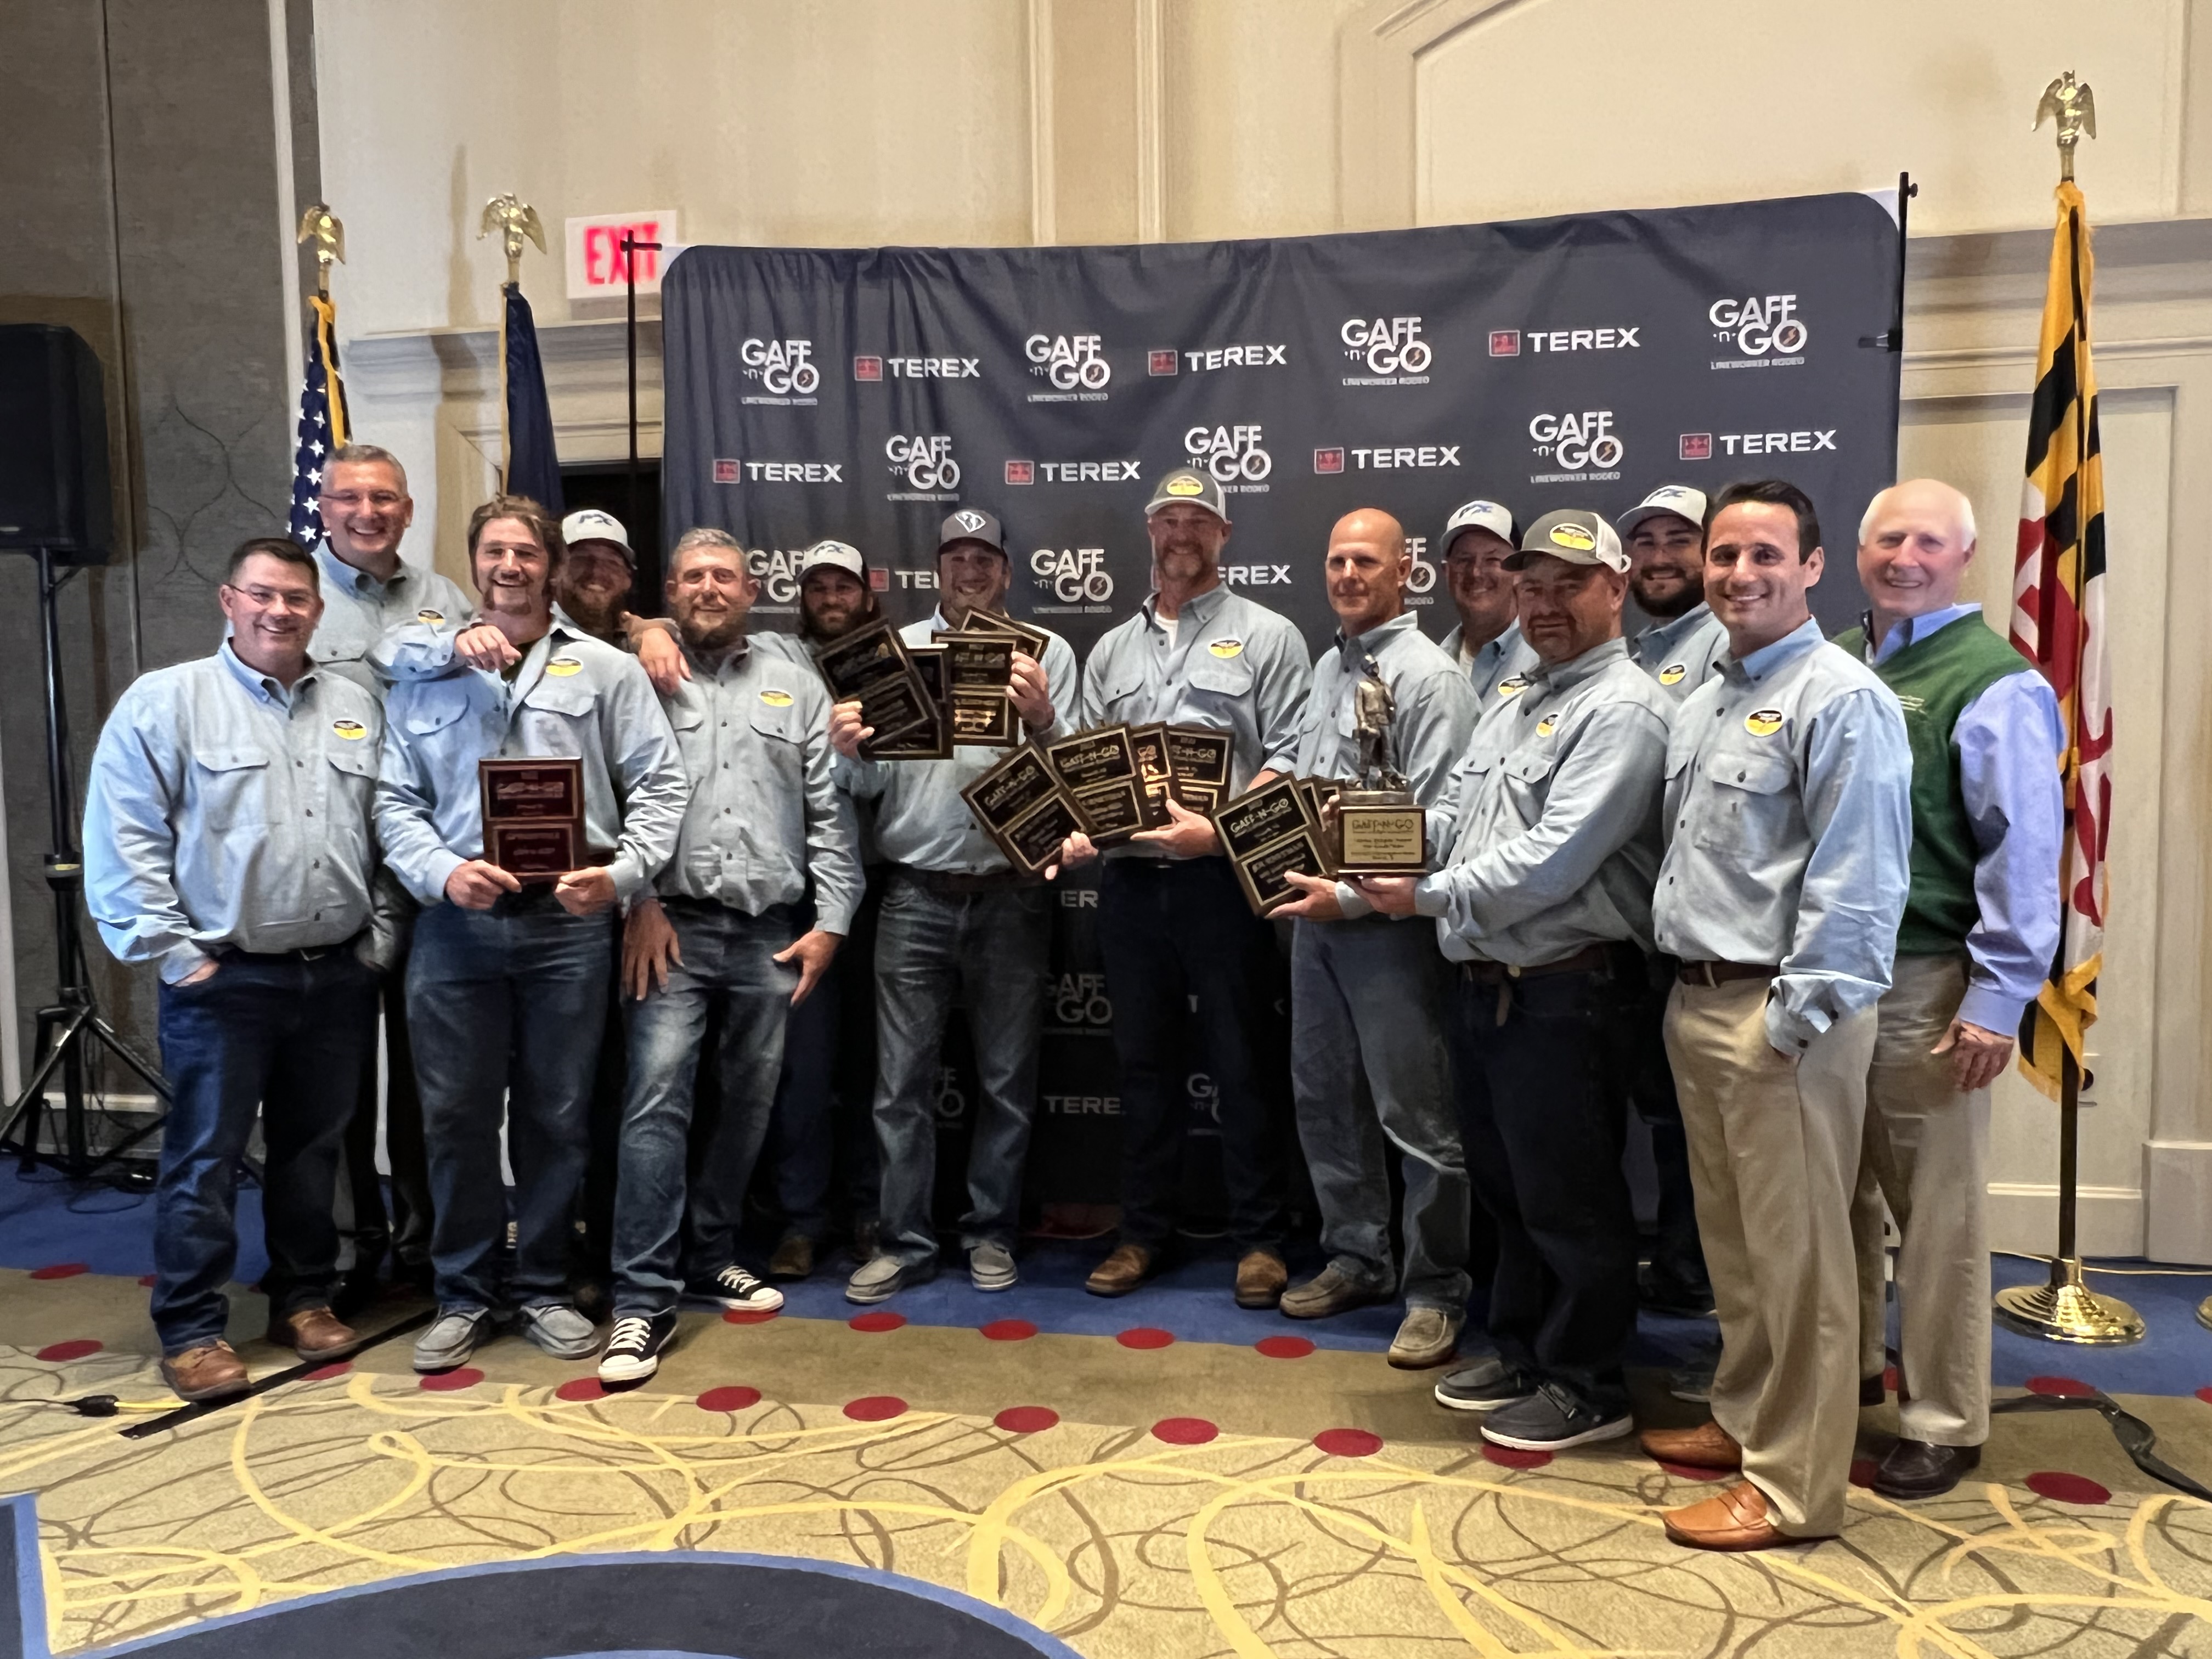 DEC's linemen team poses for photos with their awards at the Gaff-N-Go Lineworker Rodeo awards ceremony.